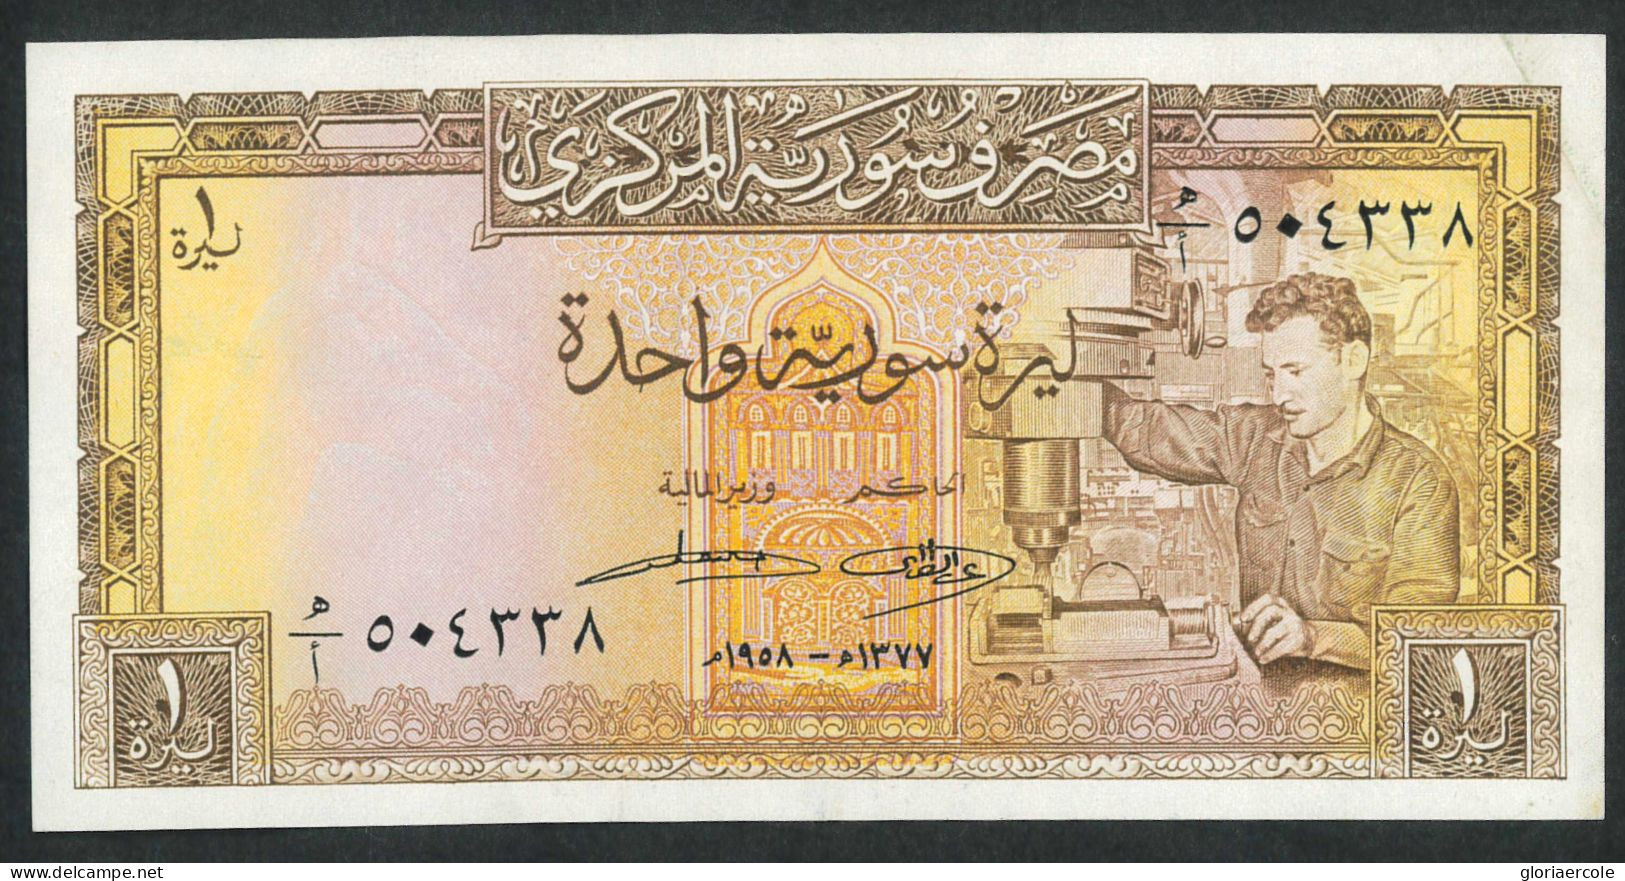 P3051 - SYRIA PICK NR. 26 ONE SYRIAN POUND UNC. - Other - Asia